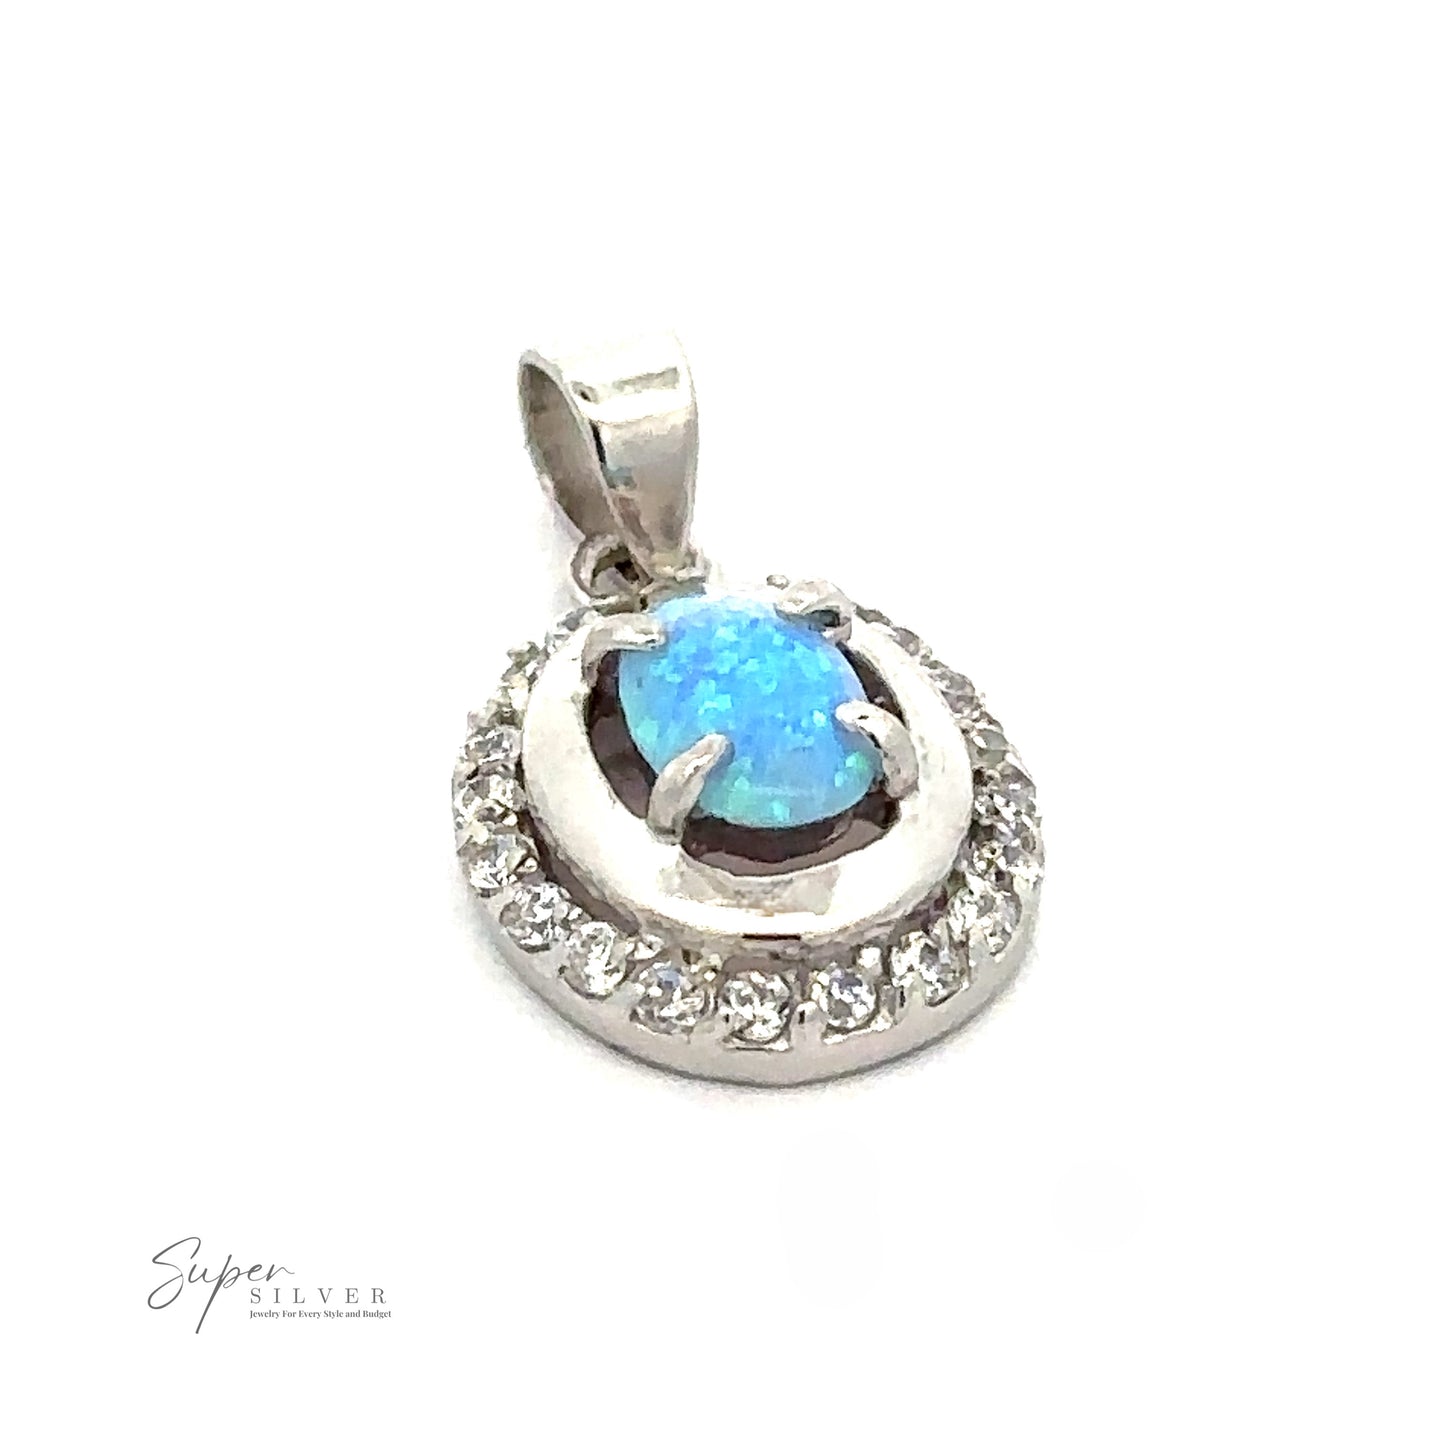 
                  
                    A silver pendant featuring an oval blue lab-created opal gemstone surrounded by a ring of small clear cubic zirconia stones. The pendant has a simple bail for attaching to a necklace, making it a timeless piece of Art Deco jewelry. The "Opal Pendants with Cubic Zirconia" logo is also visible.
                  
                